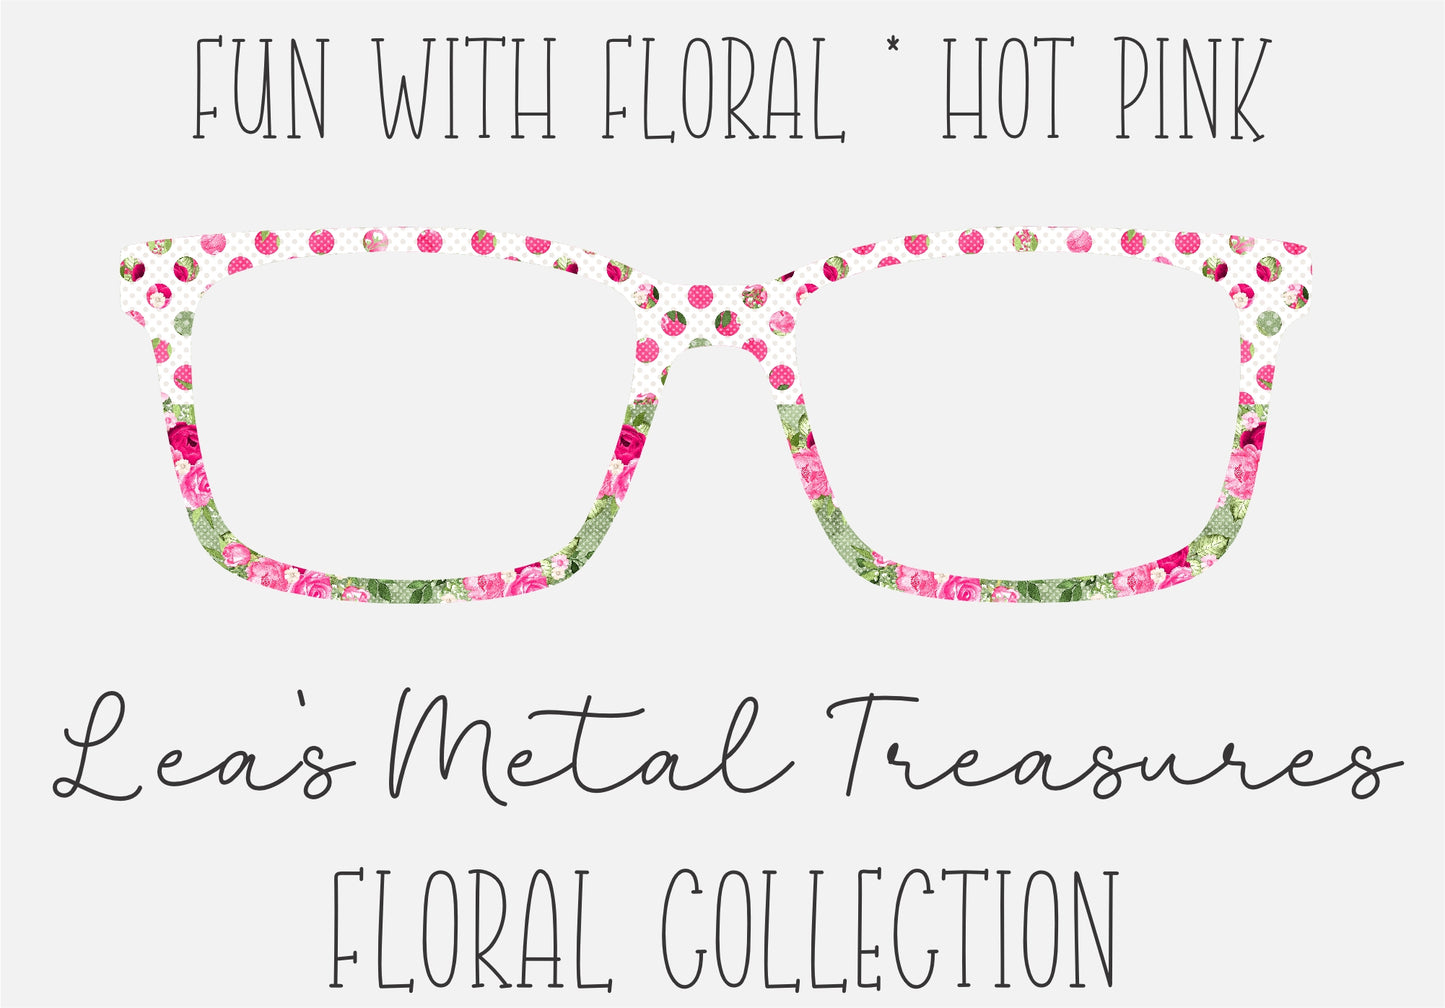 Fun With Floral Hot Pink